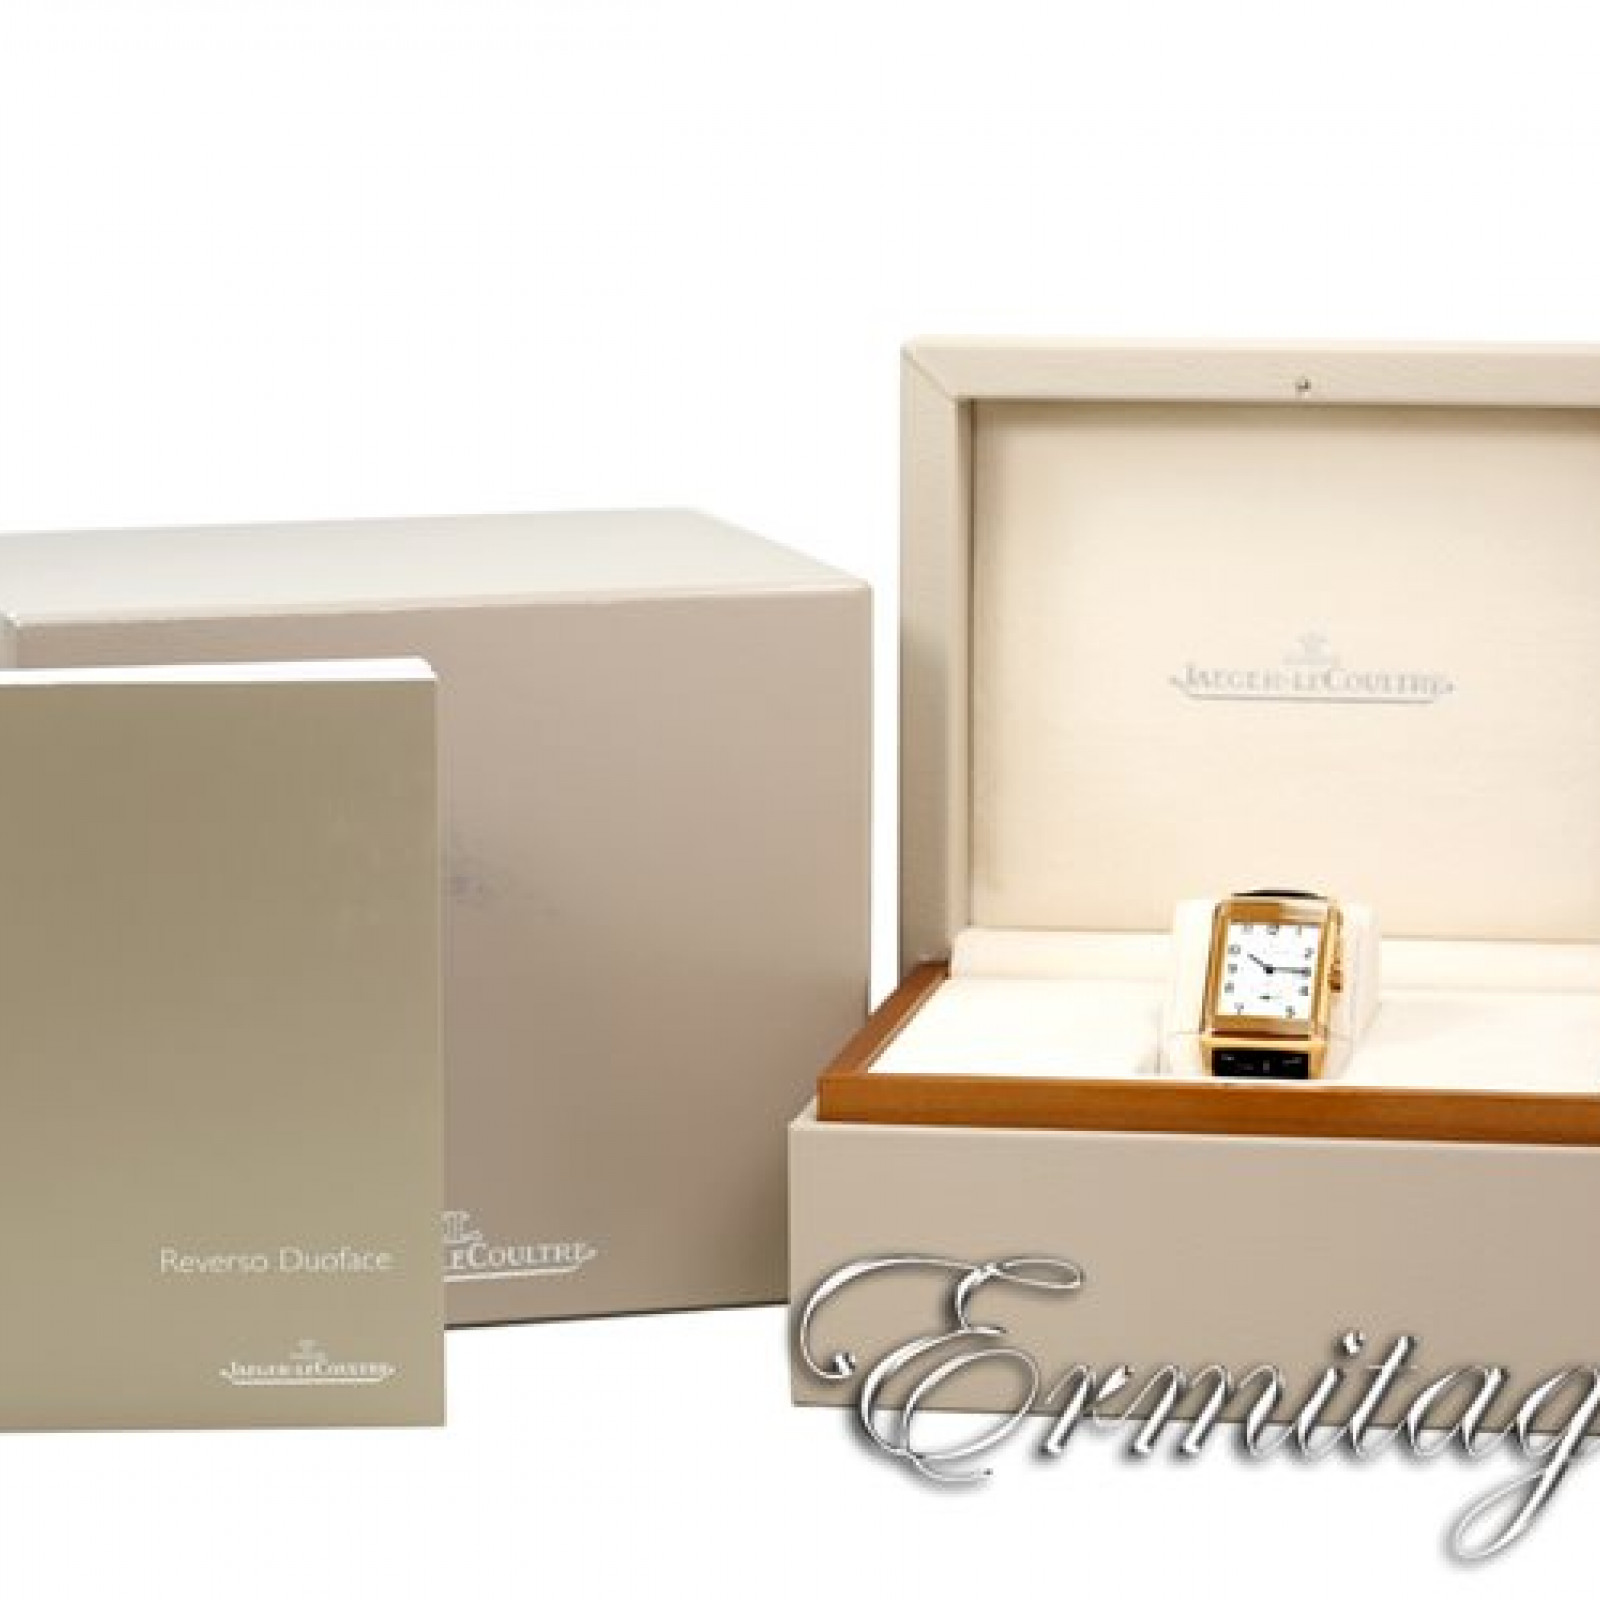 Jaeger LeCoultre Reverso Duo Q2712410 Gold